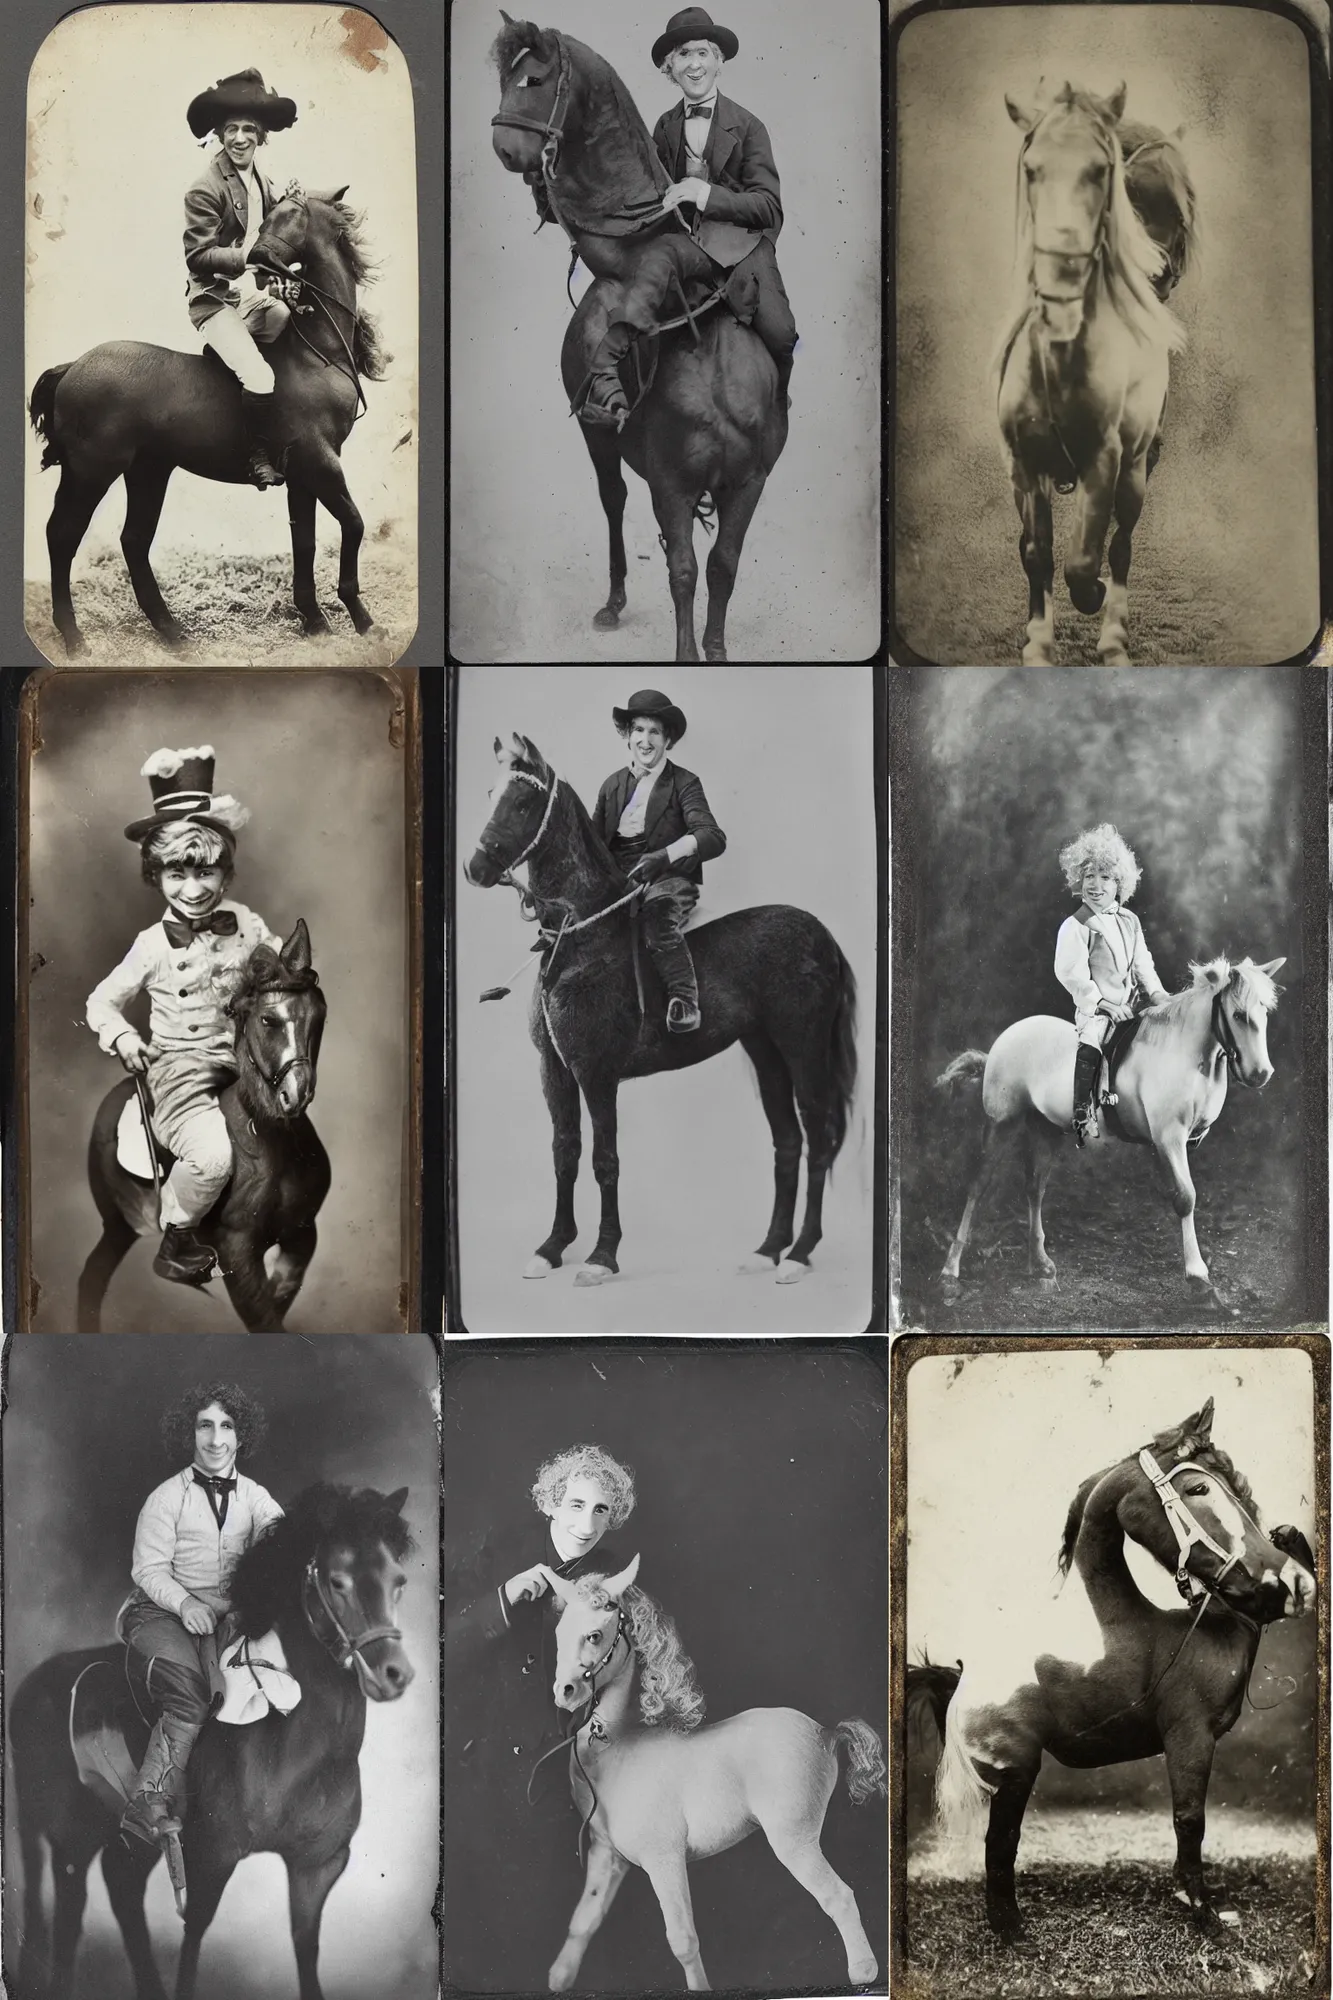 Prompt: an old tintype photograph of Harpo Marx riding a little pony